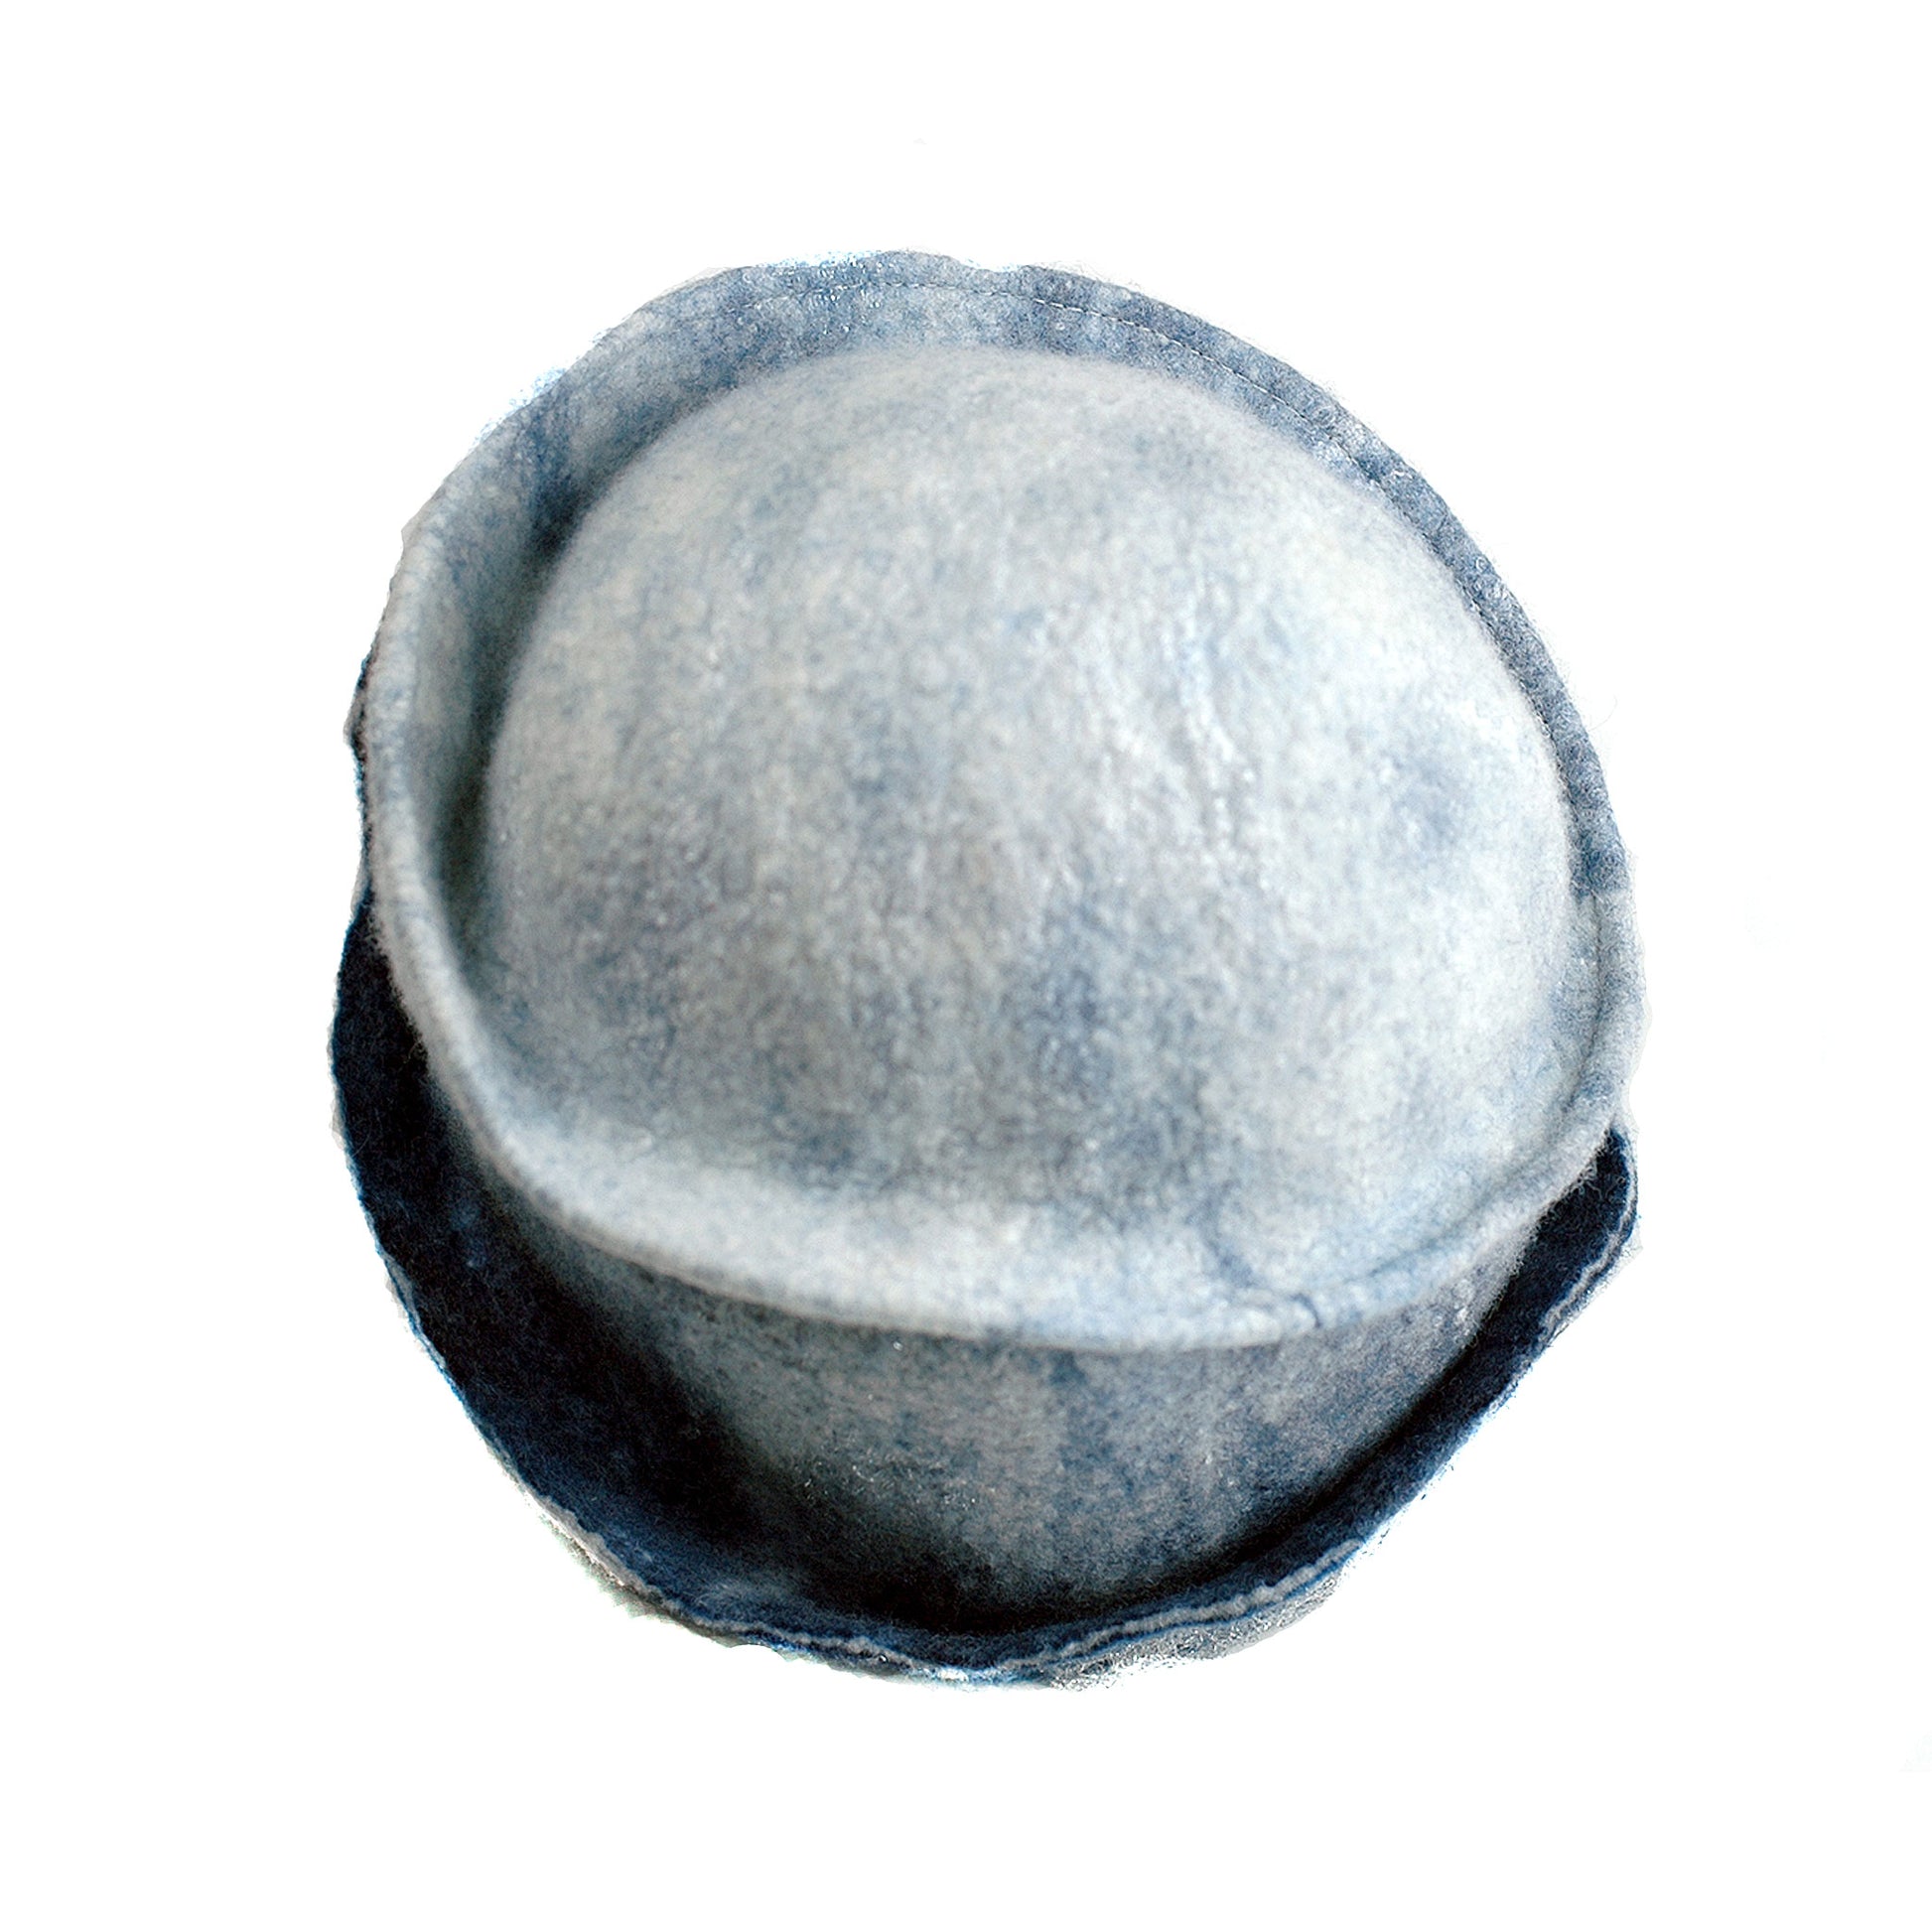 Indigo and White Felted Cloche Hat made with Superfine Merino Wool and Silver Lace - top view